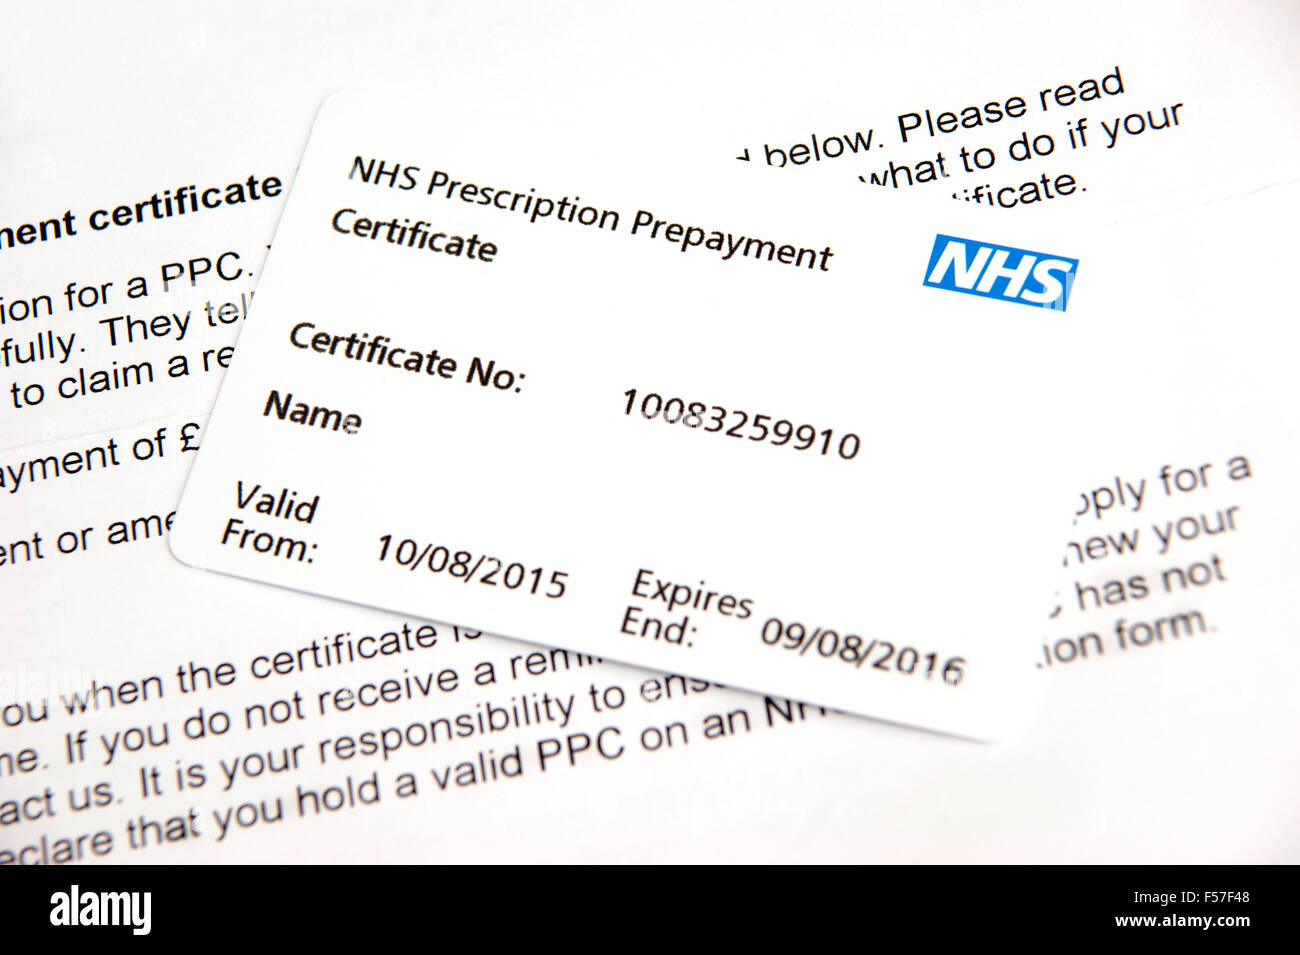 NHS prescription prepayment certificate (useful when lots of medication is taken eg 2 or more scripts a month) Stock Photo